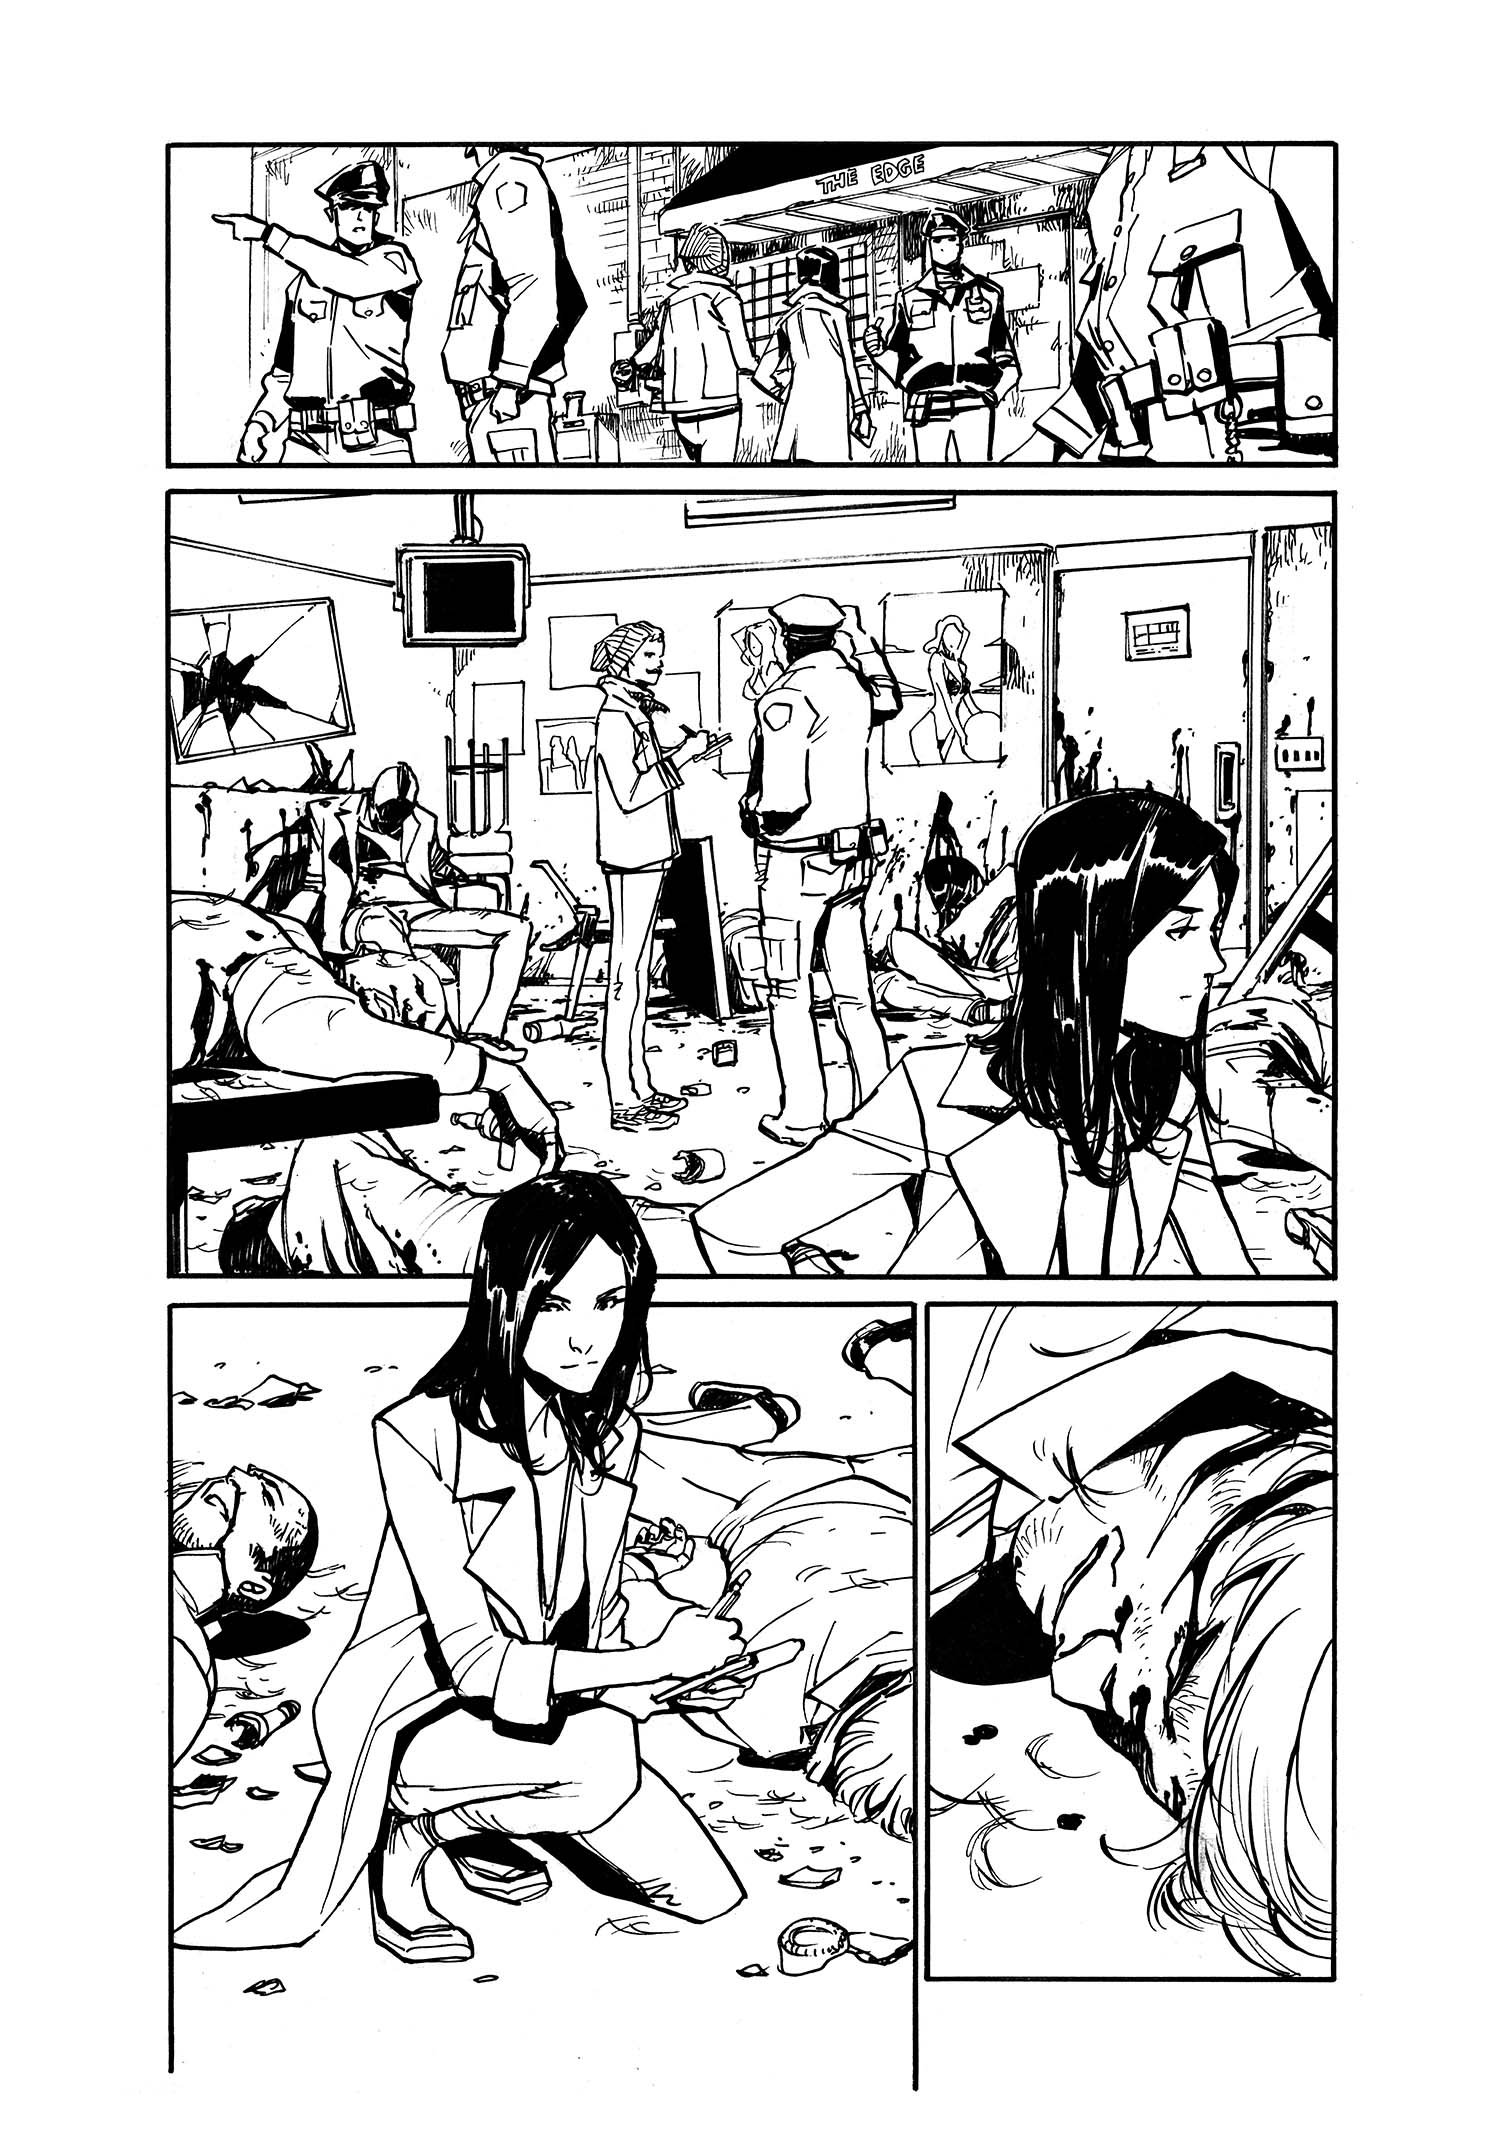 Image of Silk 1 Page 10